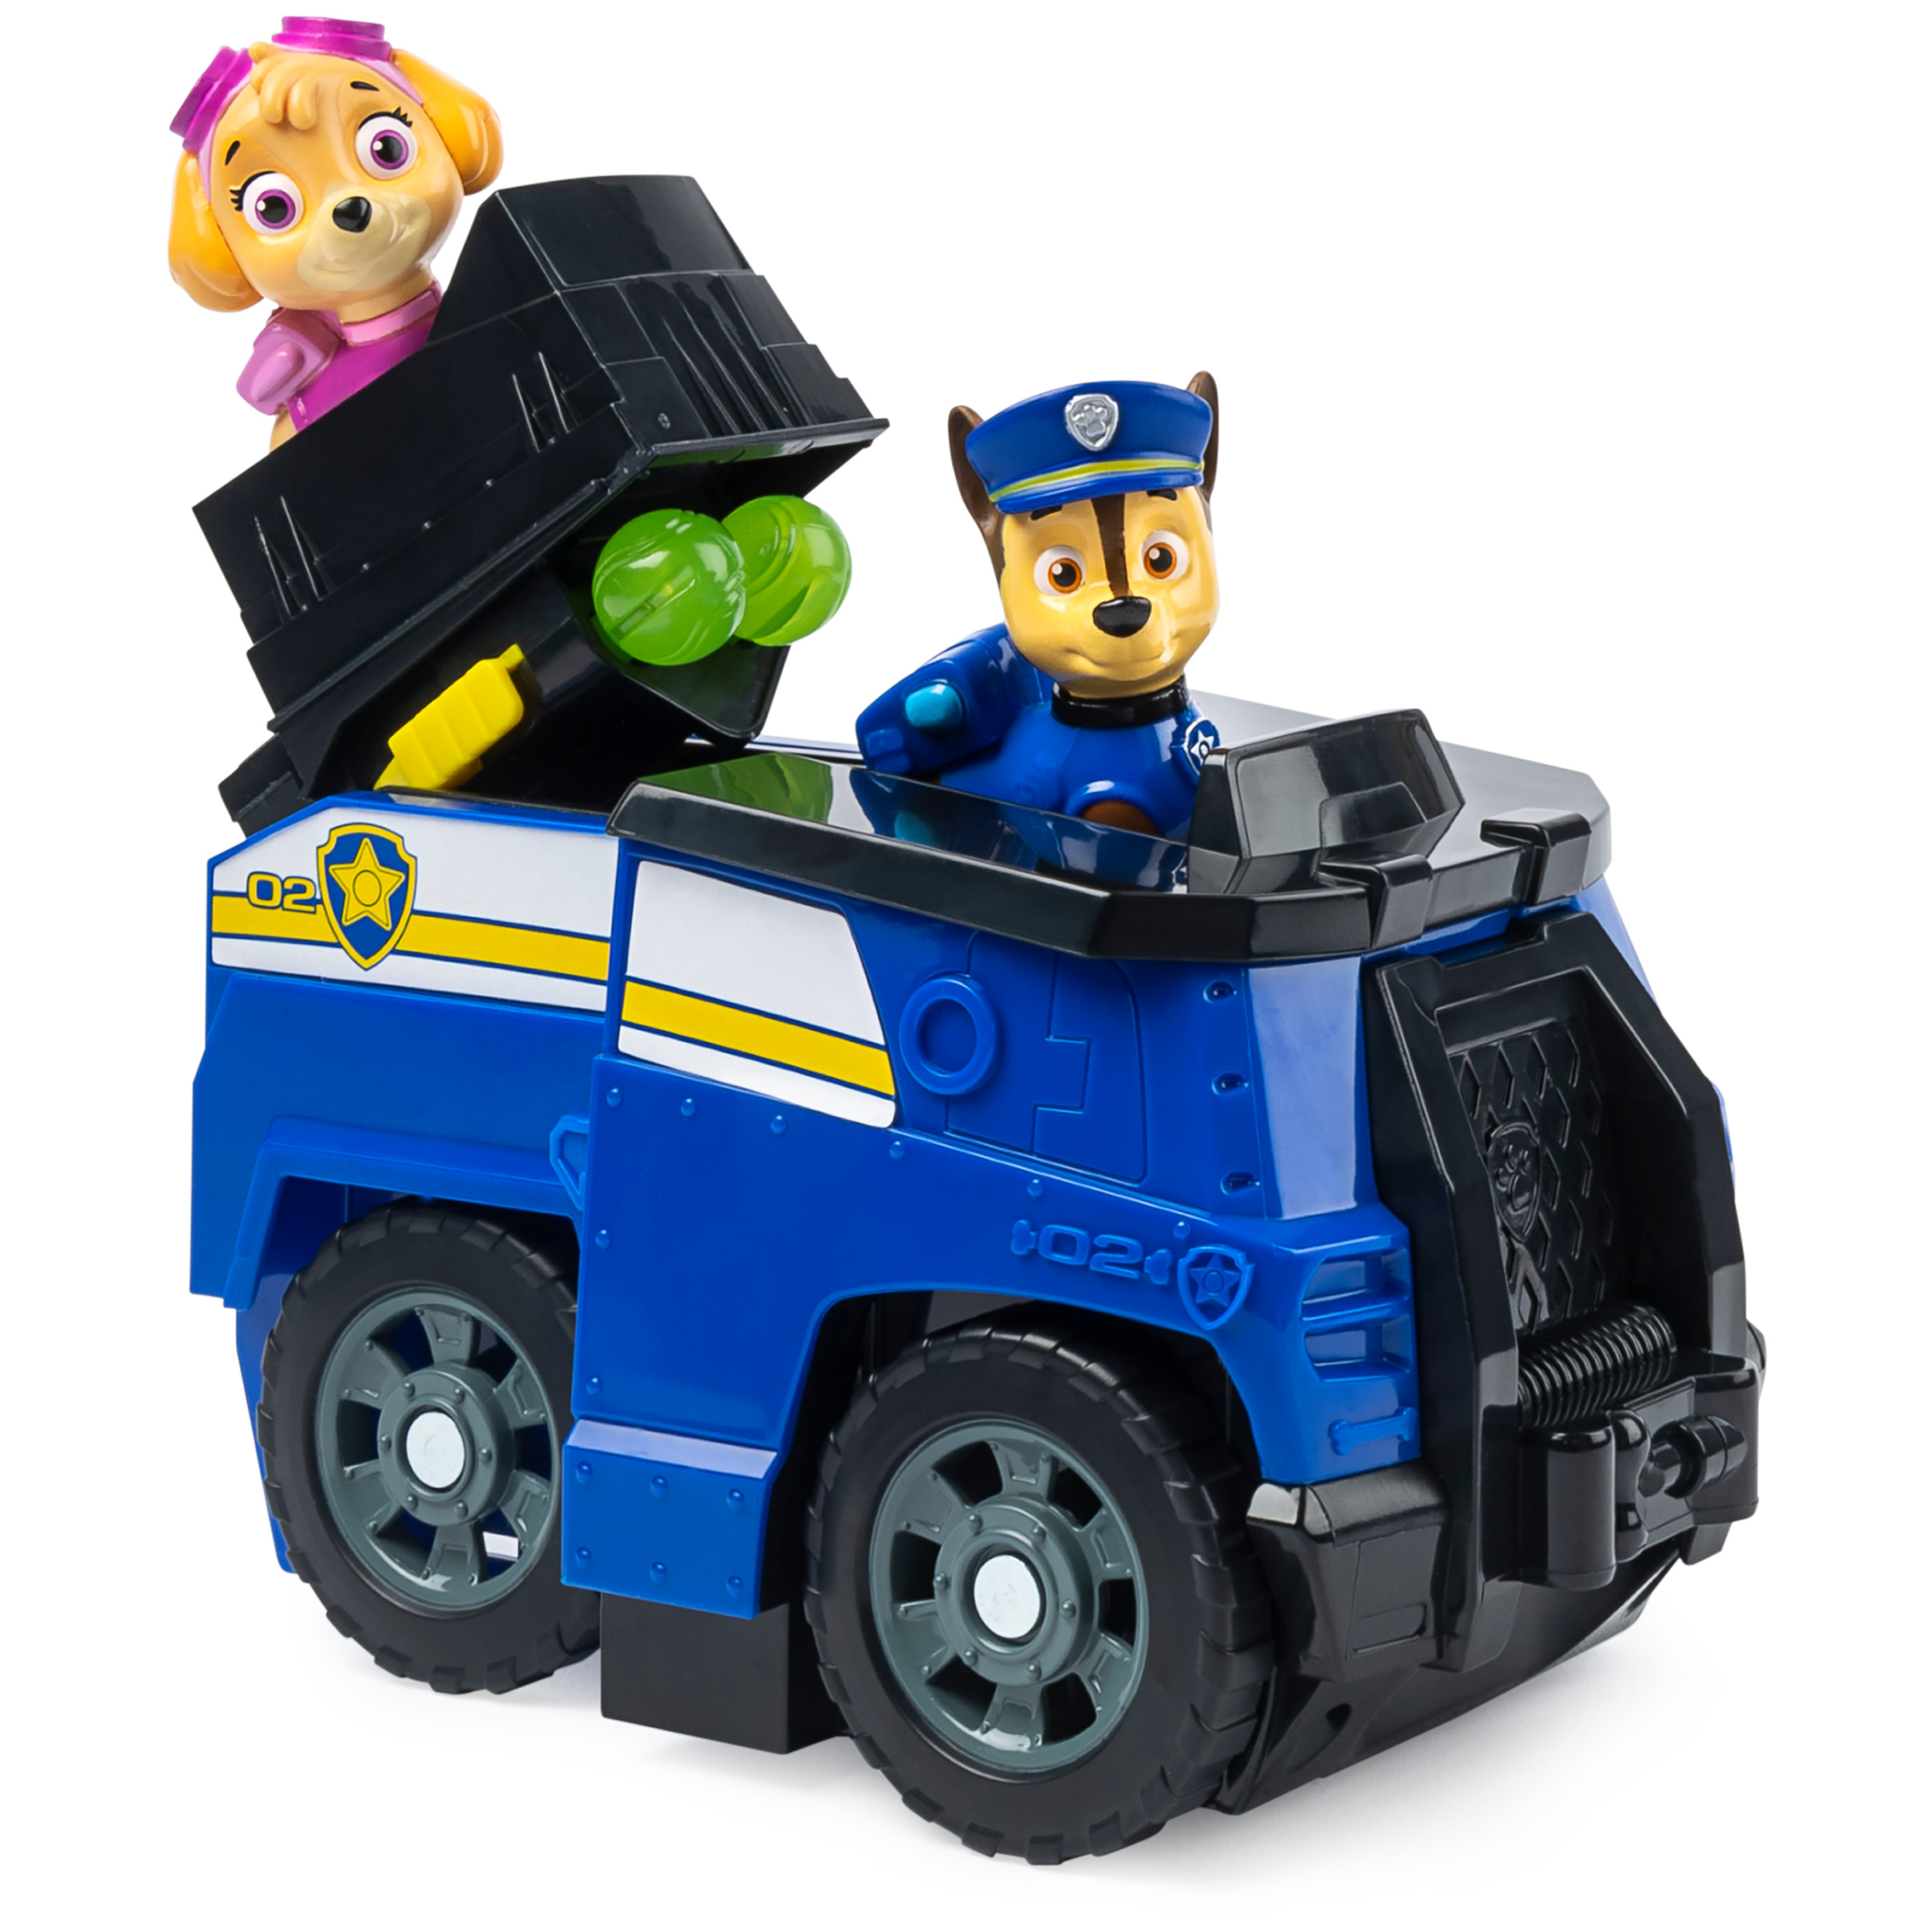 PAW Patrol, Chase Split-Second 2-in-1 Transforming Vehicle with Figure - image 4 of 8